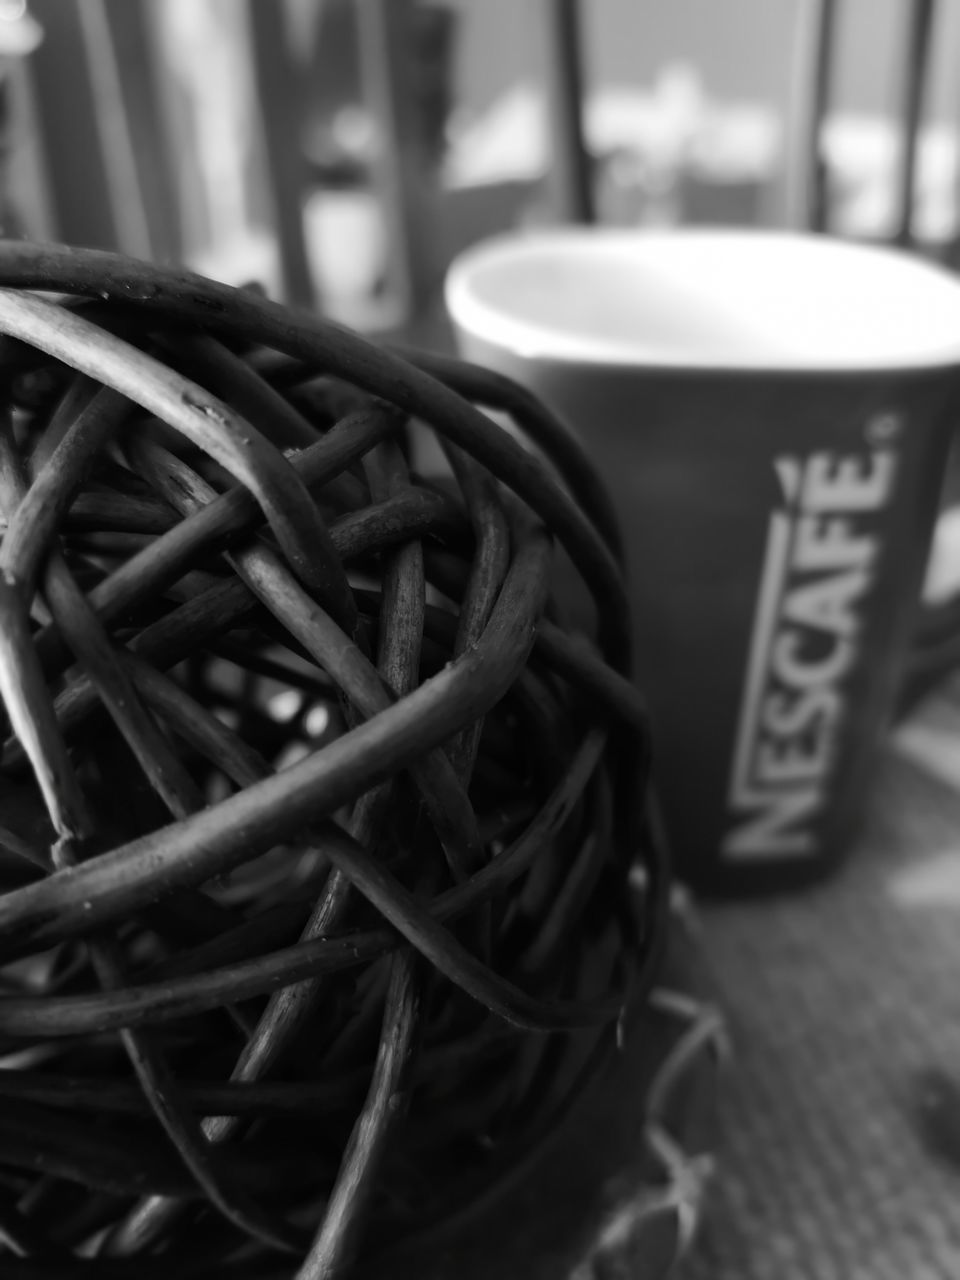 still life, focus on foreground, close-up, communication, indoors, no people, text, food and drink, table, western script, cup, connection, selective focus, food, day, mug, technology, metal, art and craft, large group of objects, crockery